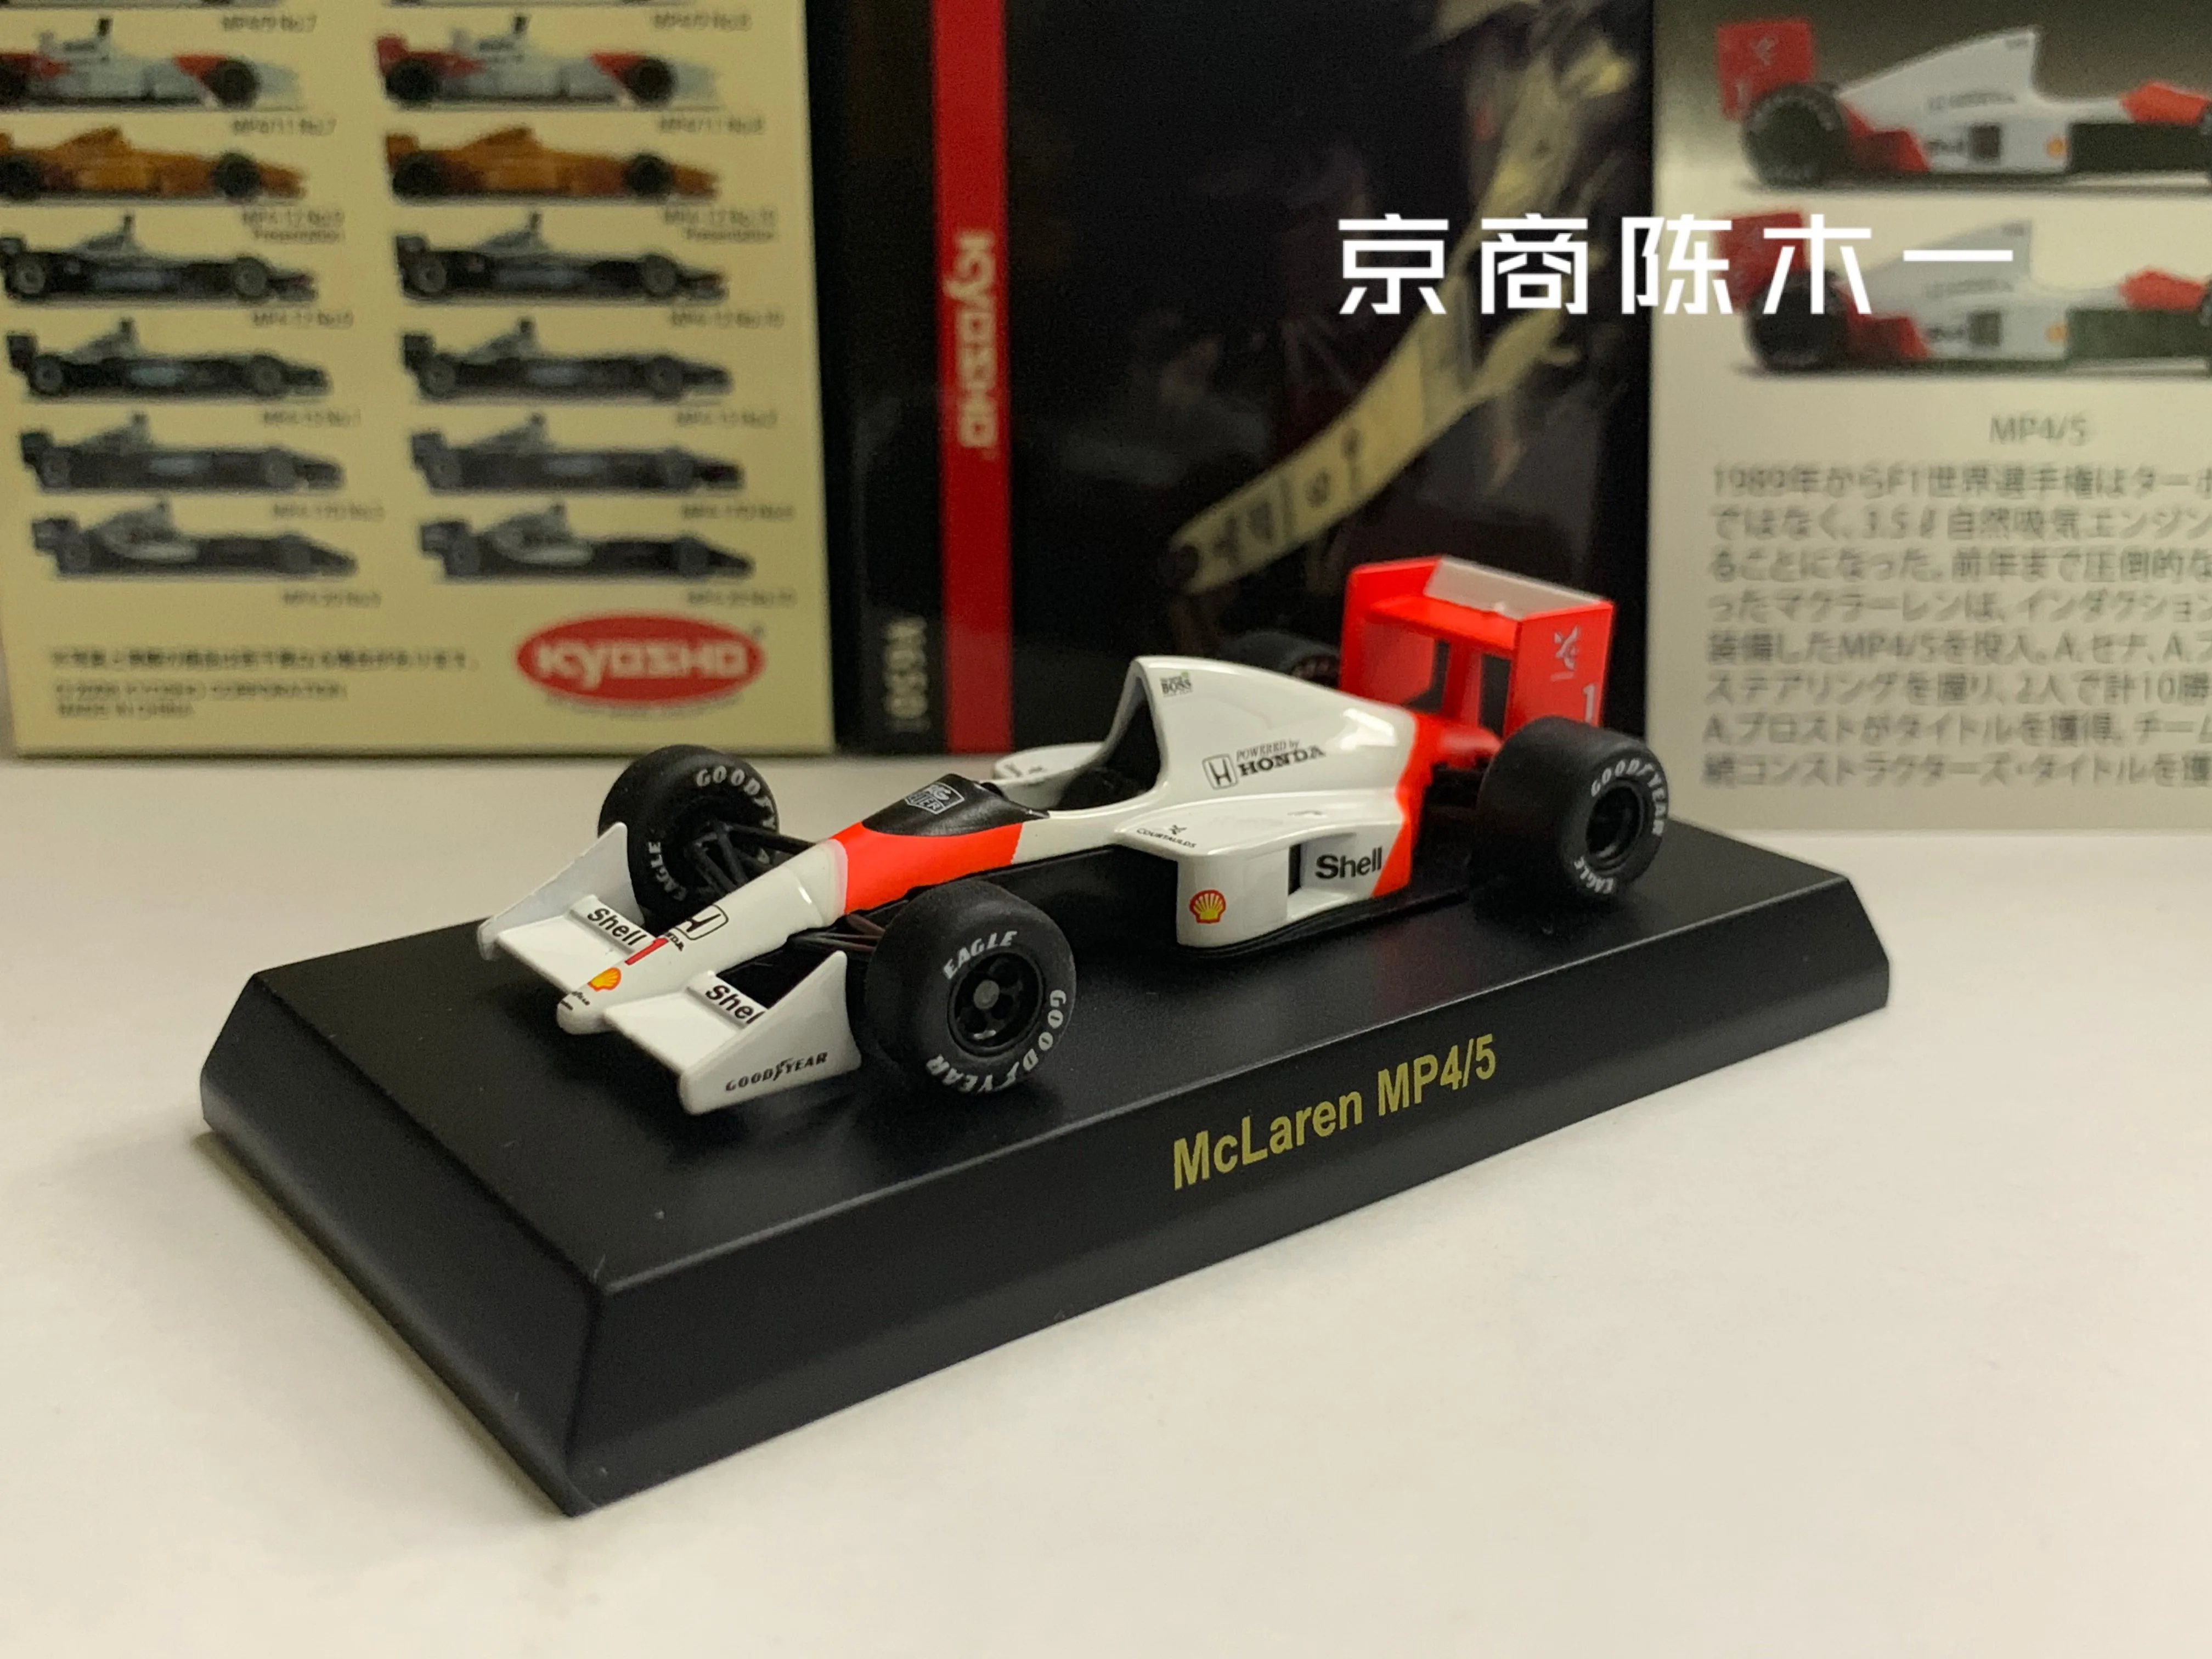 

1/64 KYOSHO McLaren MP4/5 1989 No. 1 F1 RACING Collection of die-cast alloy car decoration model toys